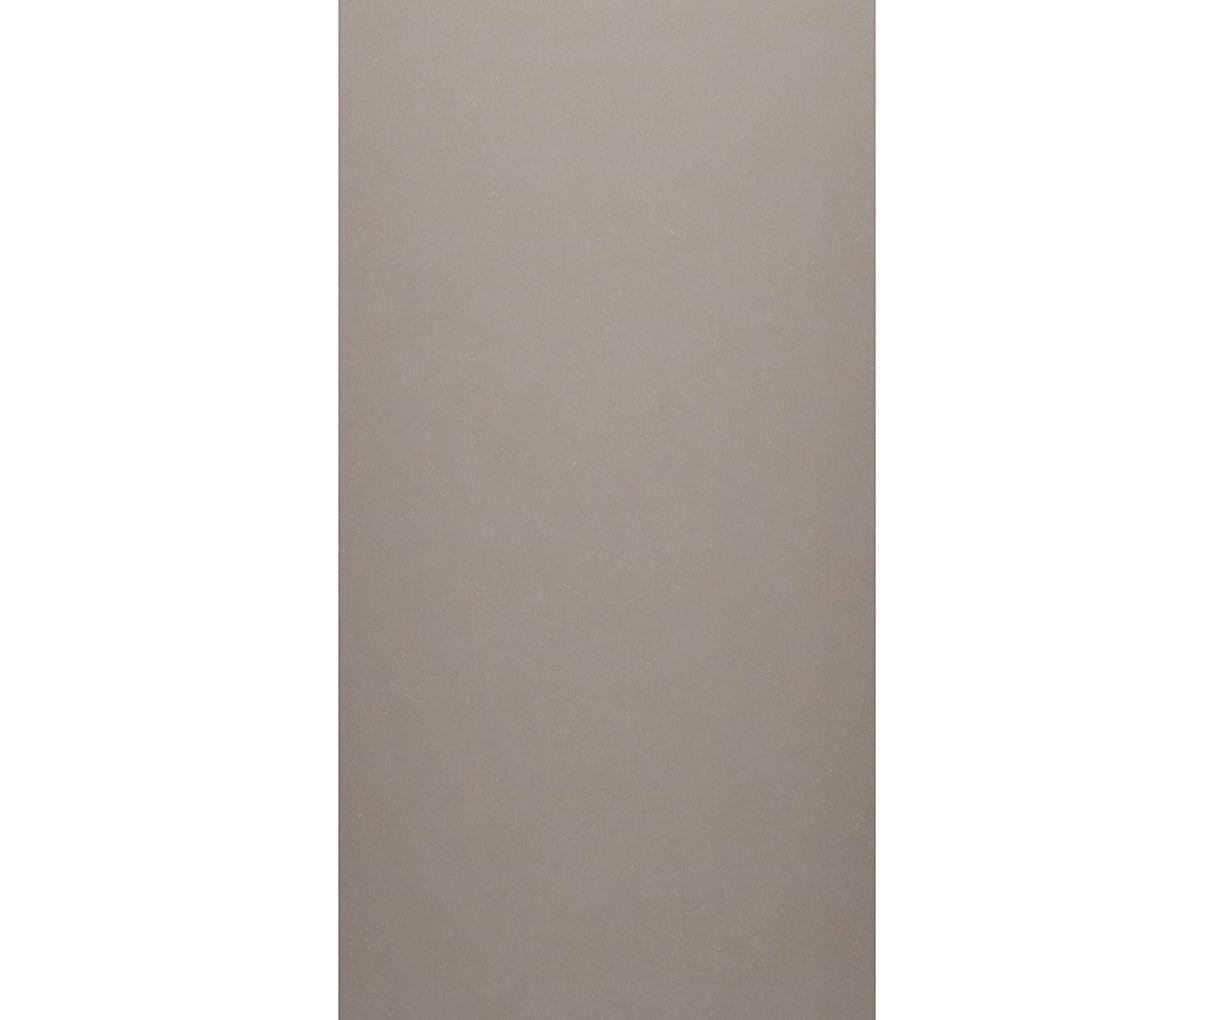 Swanstone SMMK-7262-1 62 x 72 Swanstone Smooth Tile Glue up Bathtub and Shower Single Wall Panel in Clay SMMK7262.212